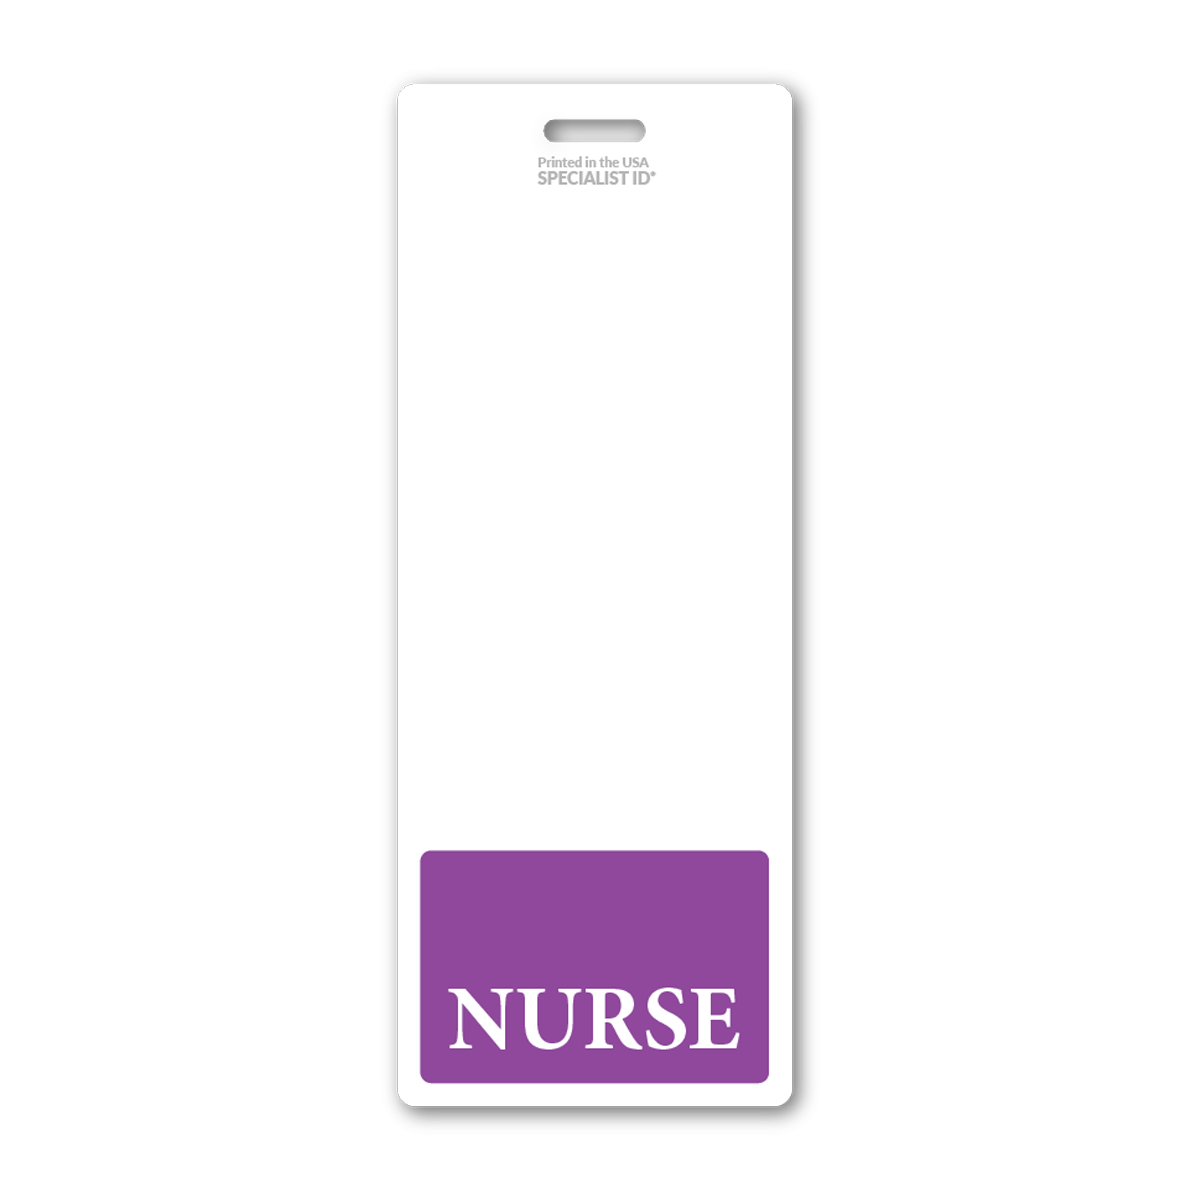 oversized Nurse badge buddy vertical - extra long ID badge buddy for nurses with a purple border - double sided